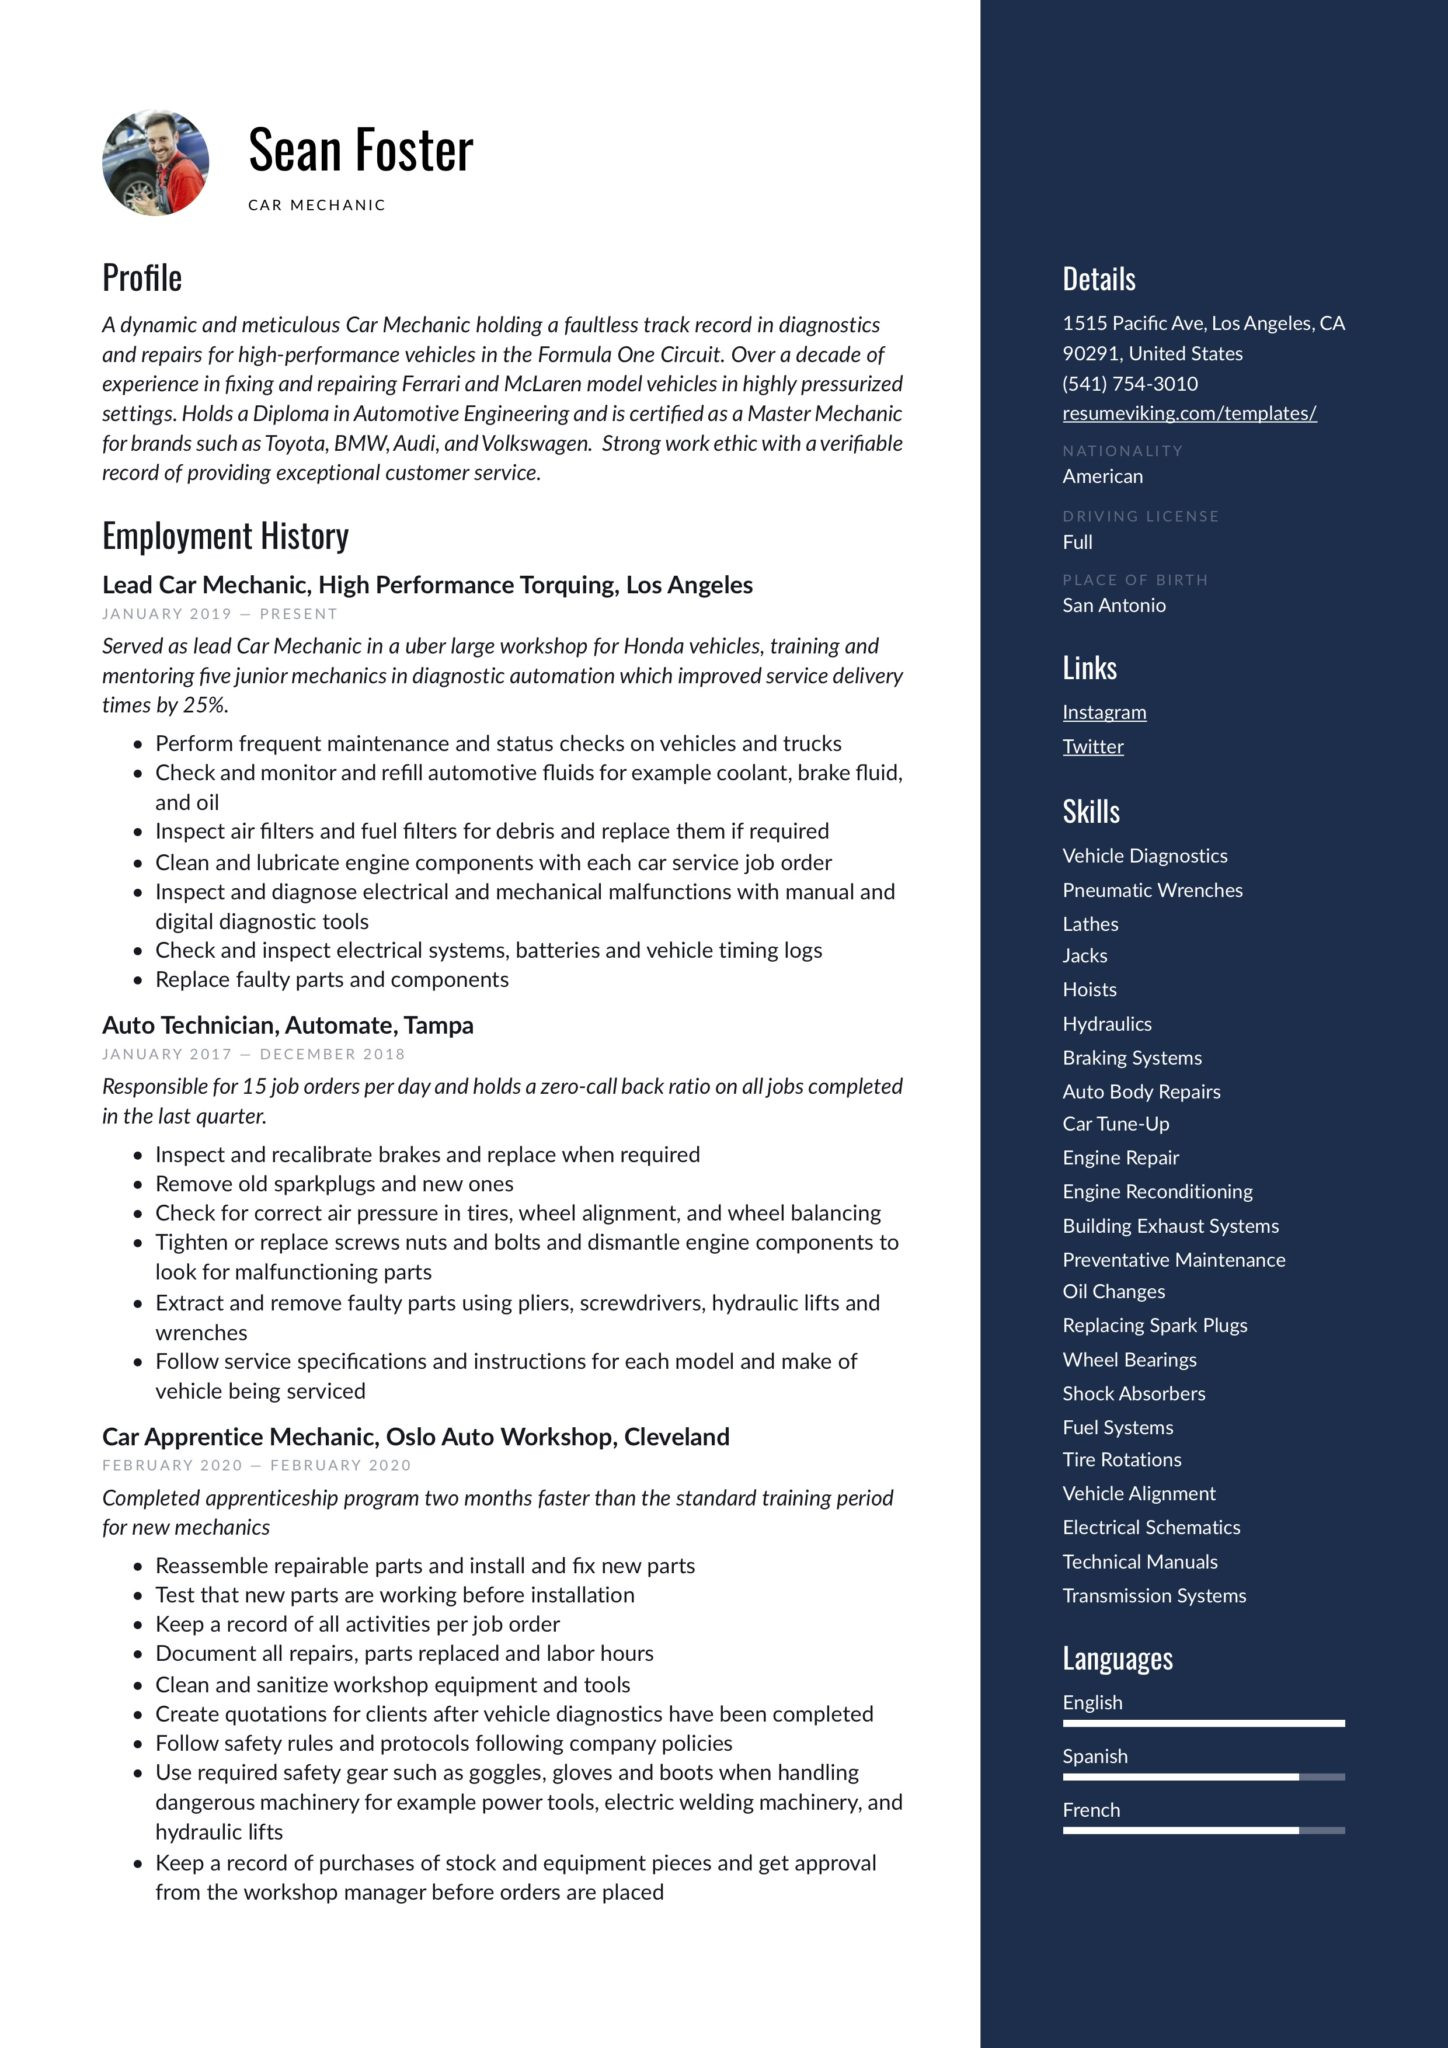 Sample Resume for Auto Body Painter Car Mechanic Resume & Guide 19 Resume Examples 2020